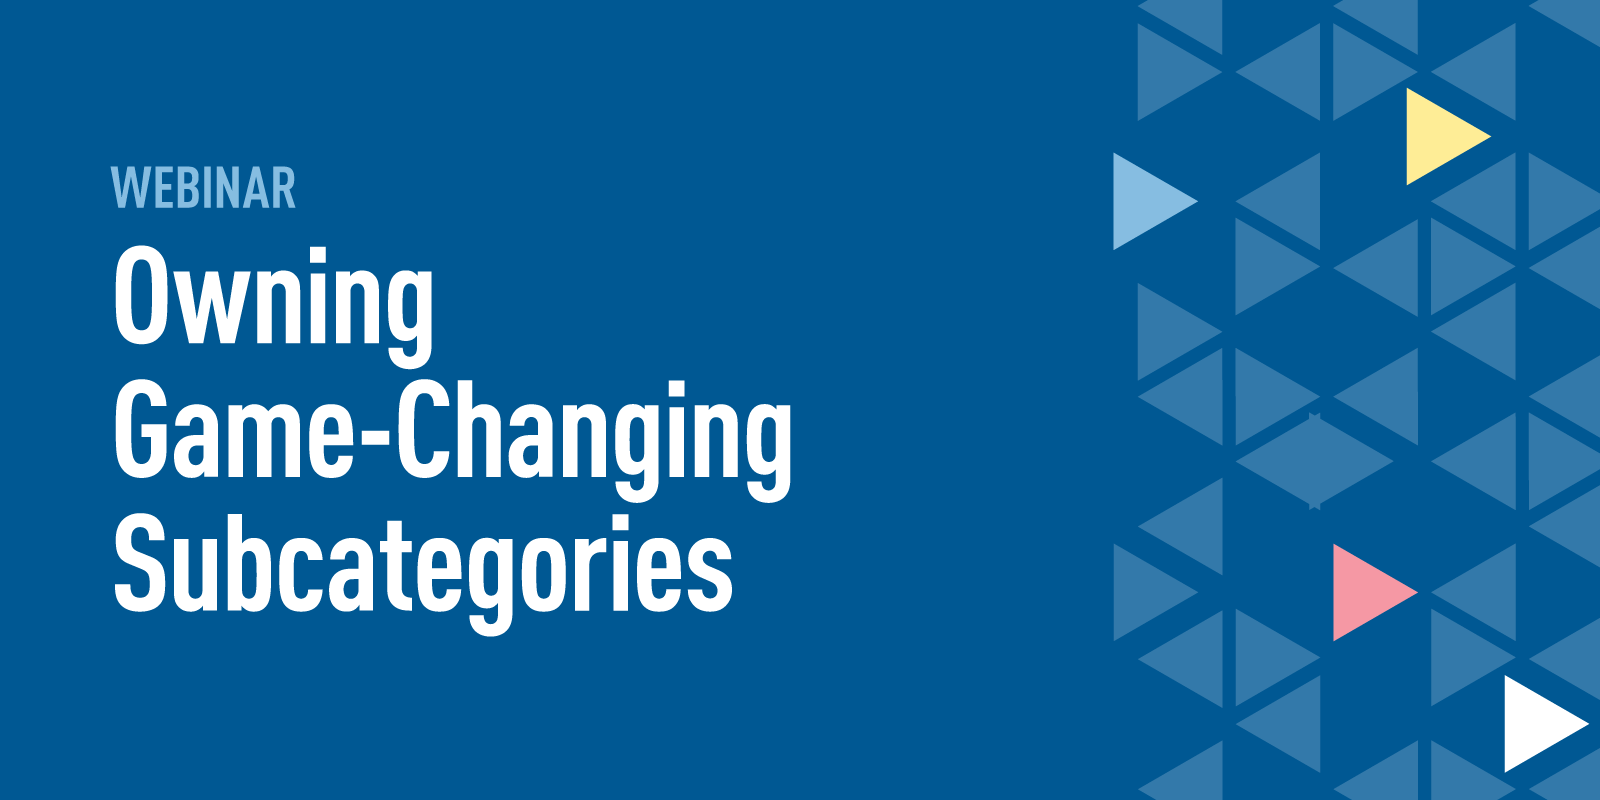 Webinar: Owning Game-Changing Subcategories